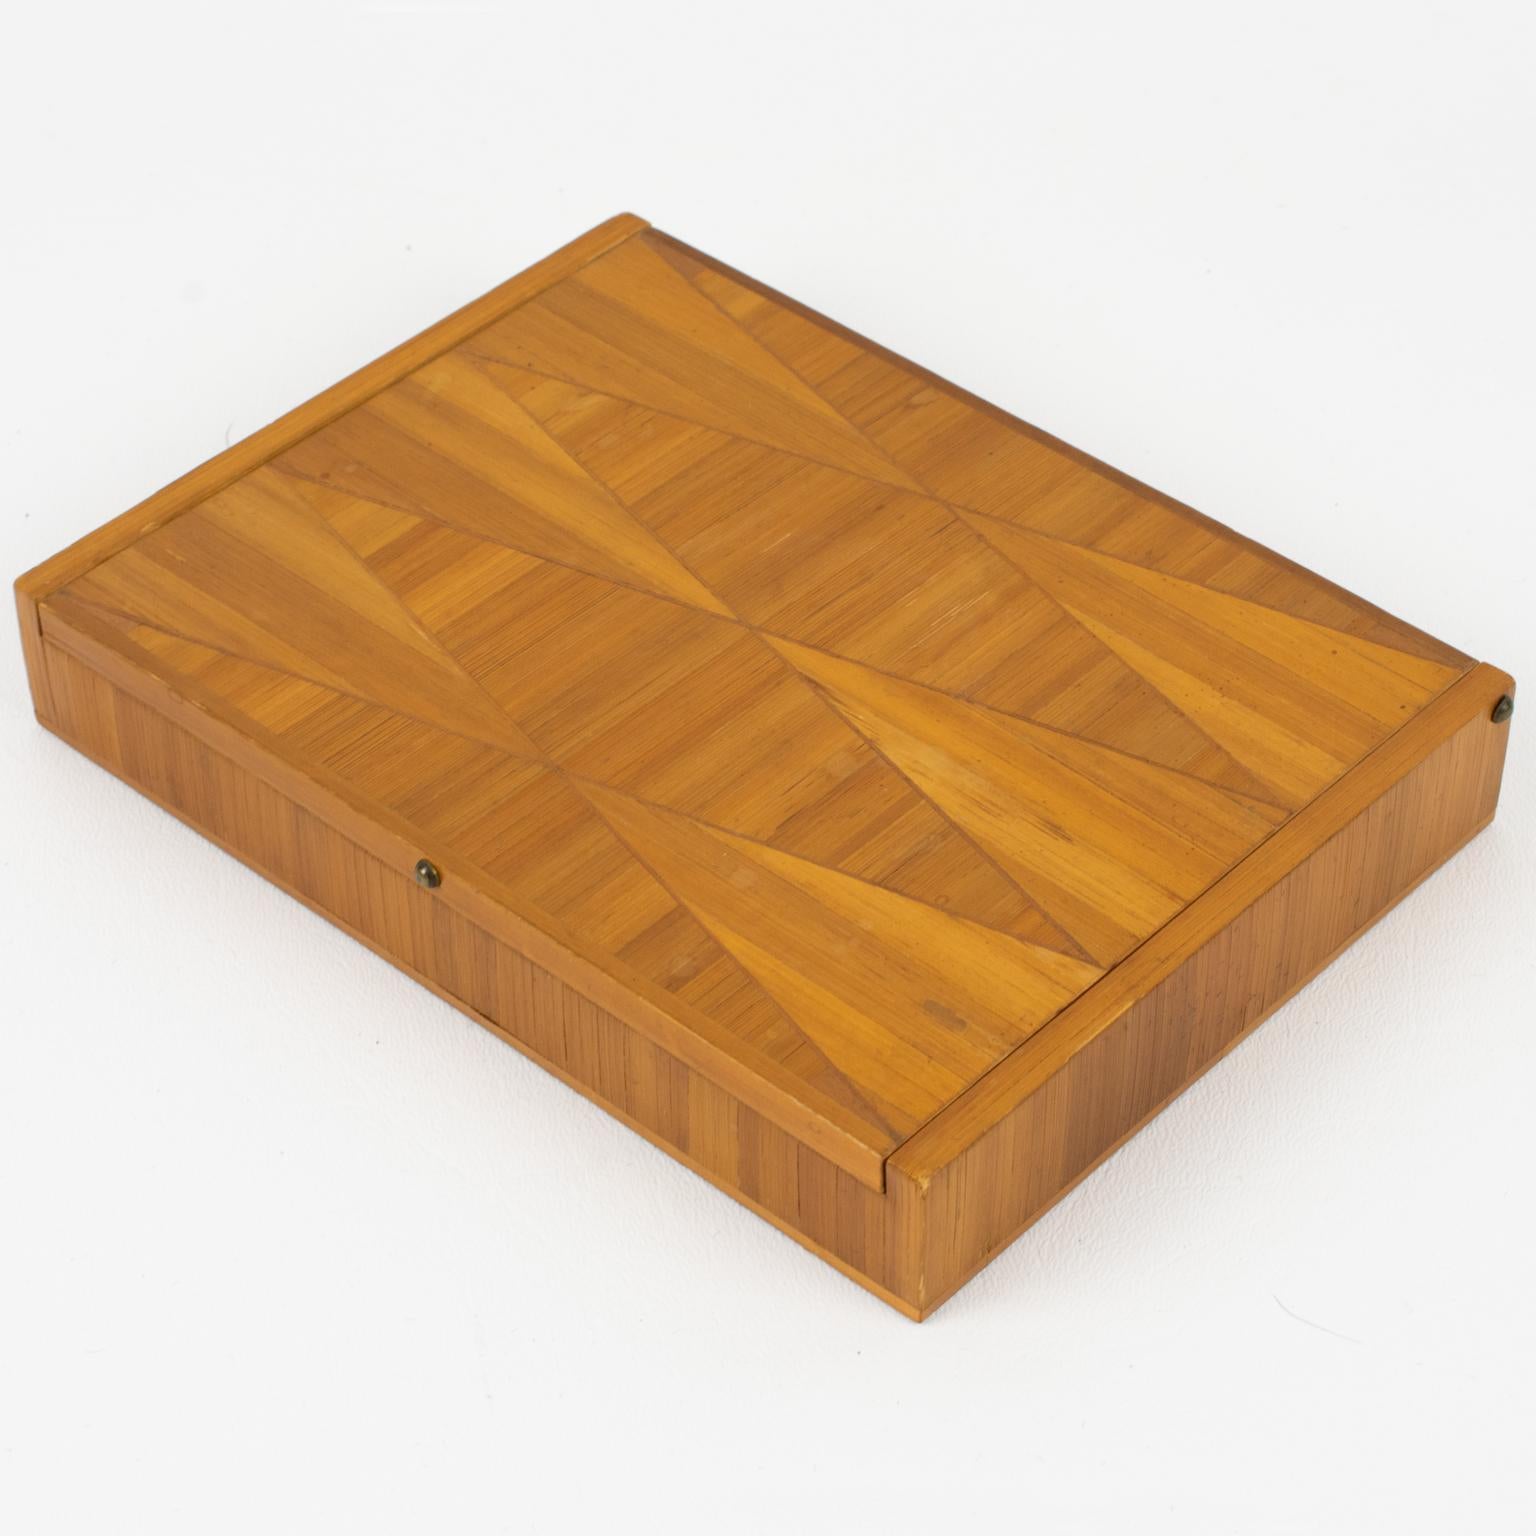 Decorative Straw Marquetry Box, France 1930s attributed to Jean Michel Frank For Sale 4